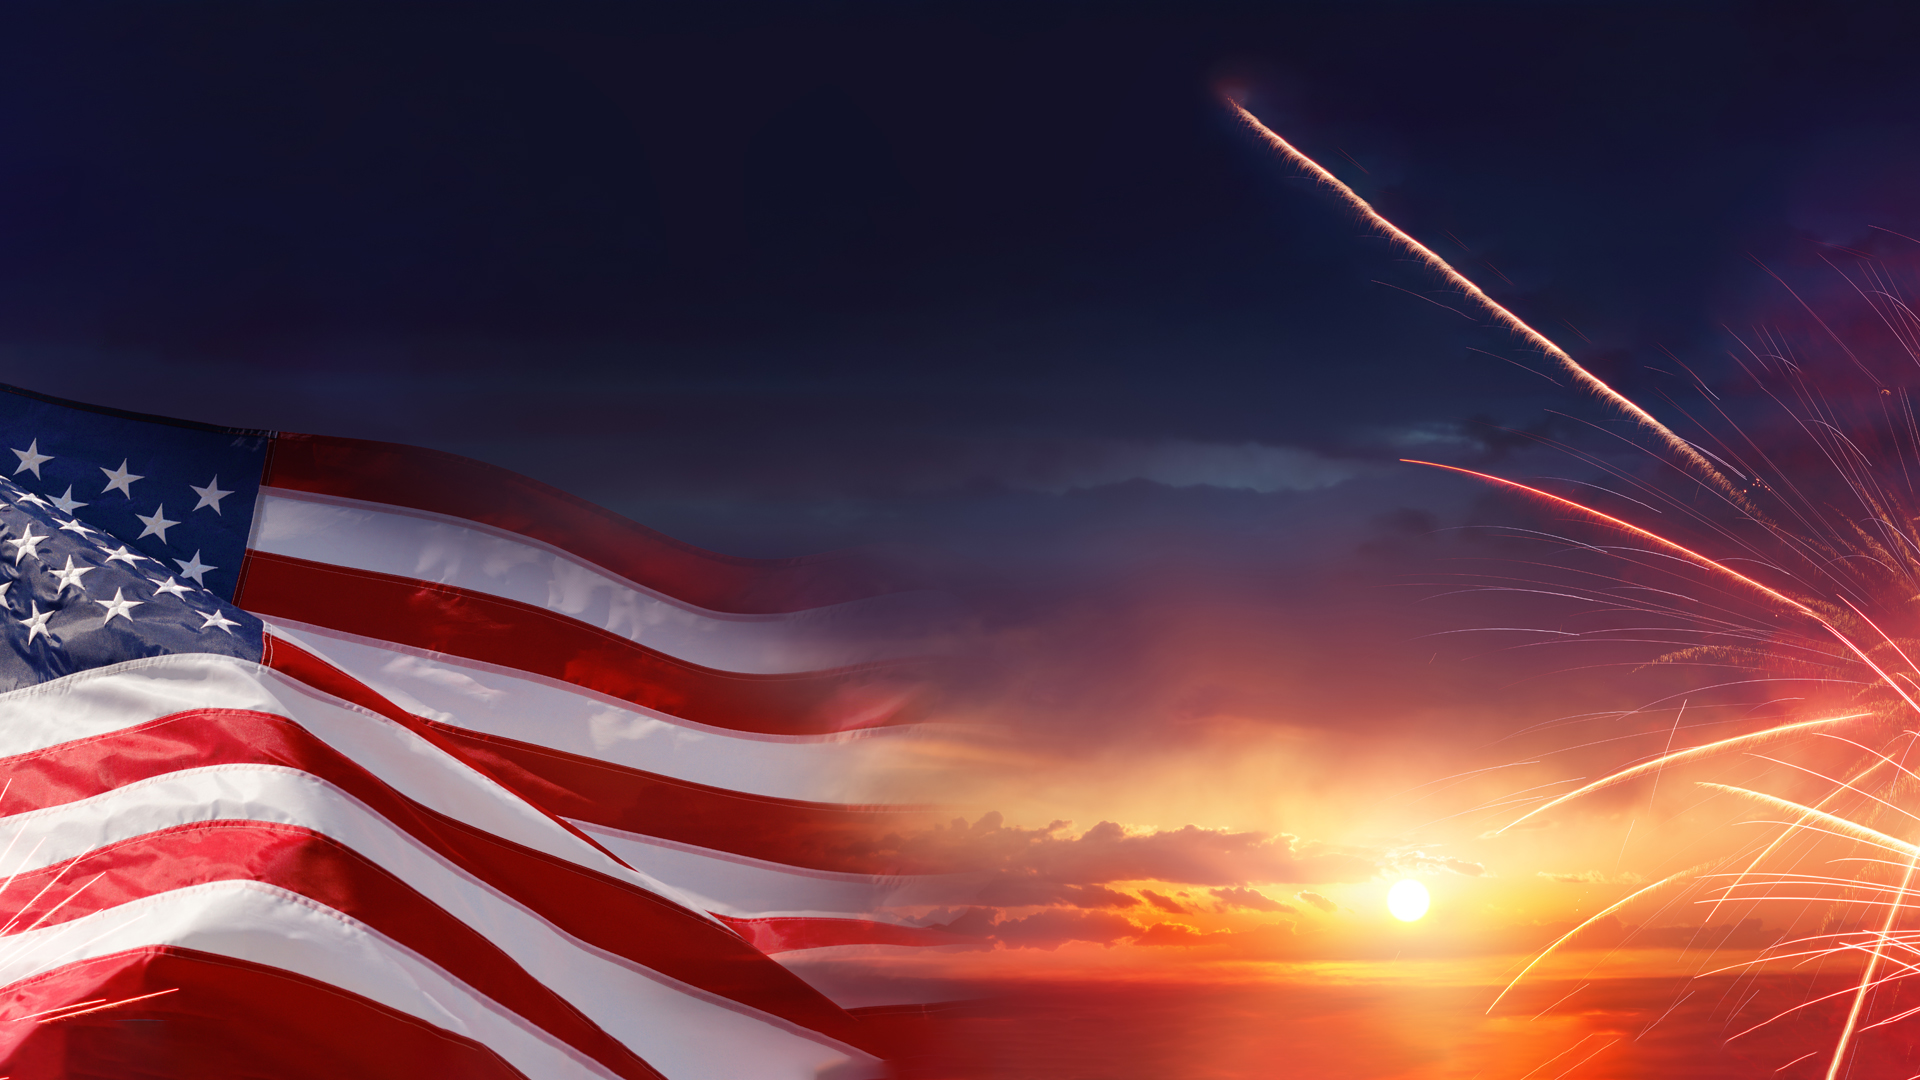 American Celebration and USA Flag And Fireworks At Sunset Image